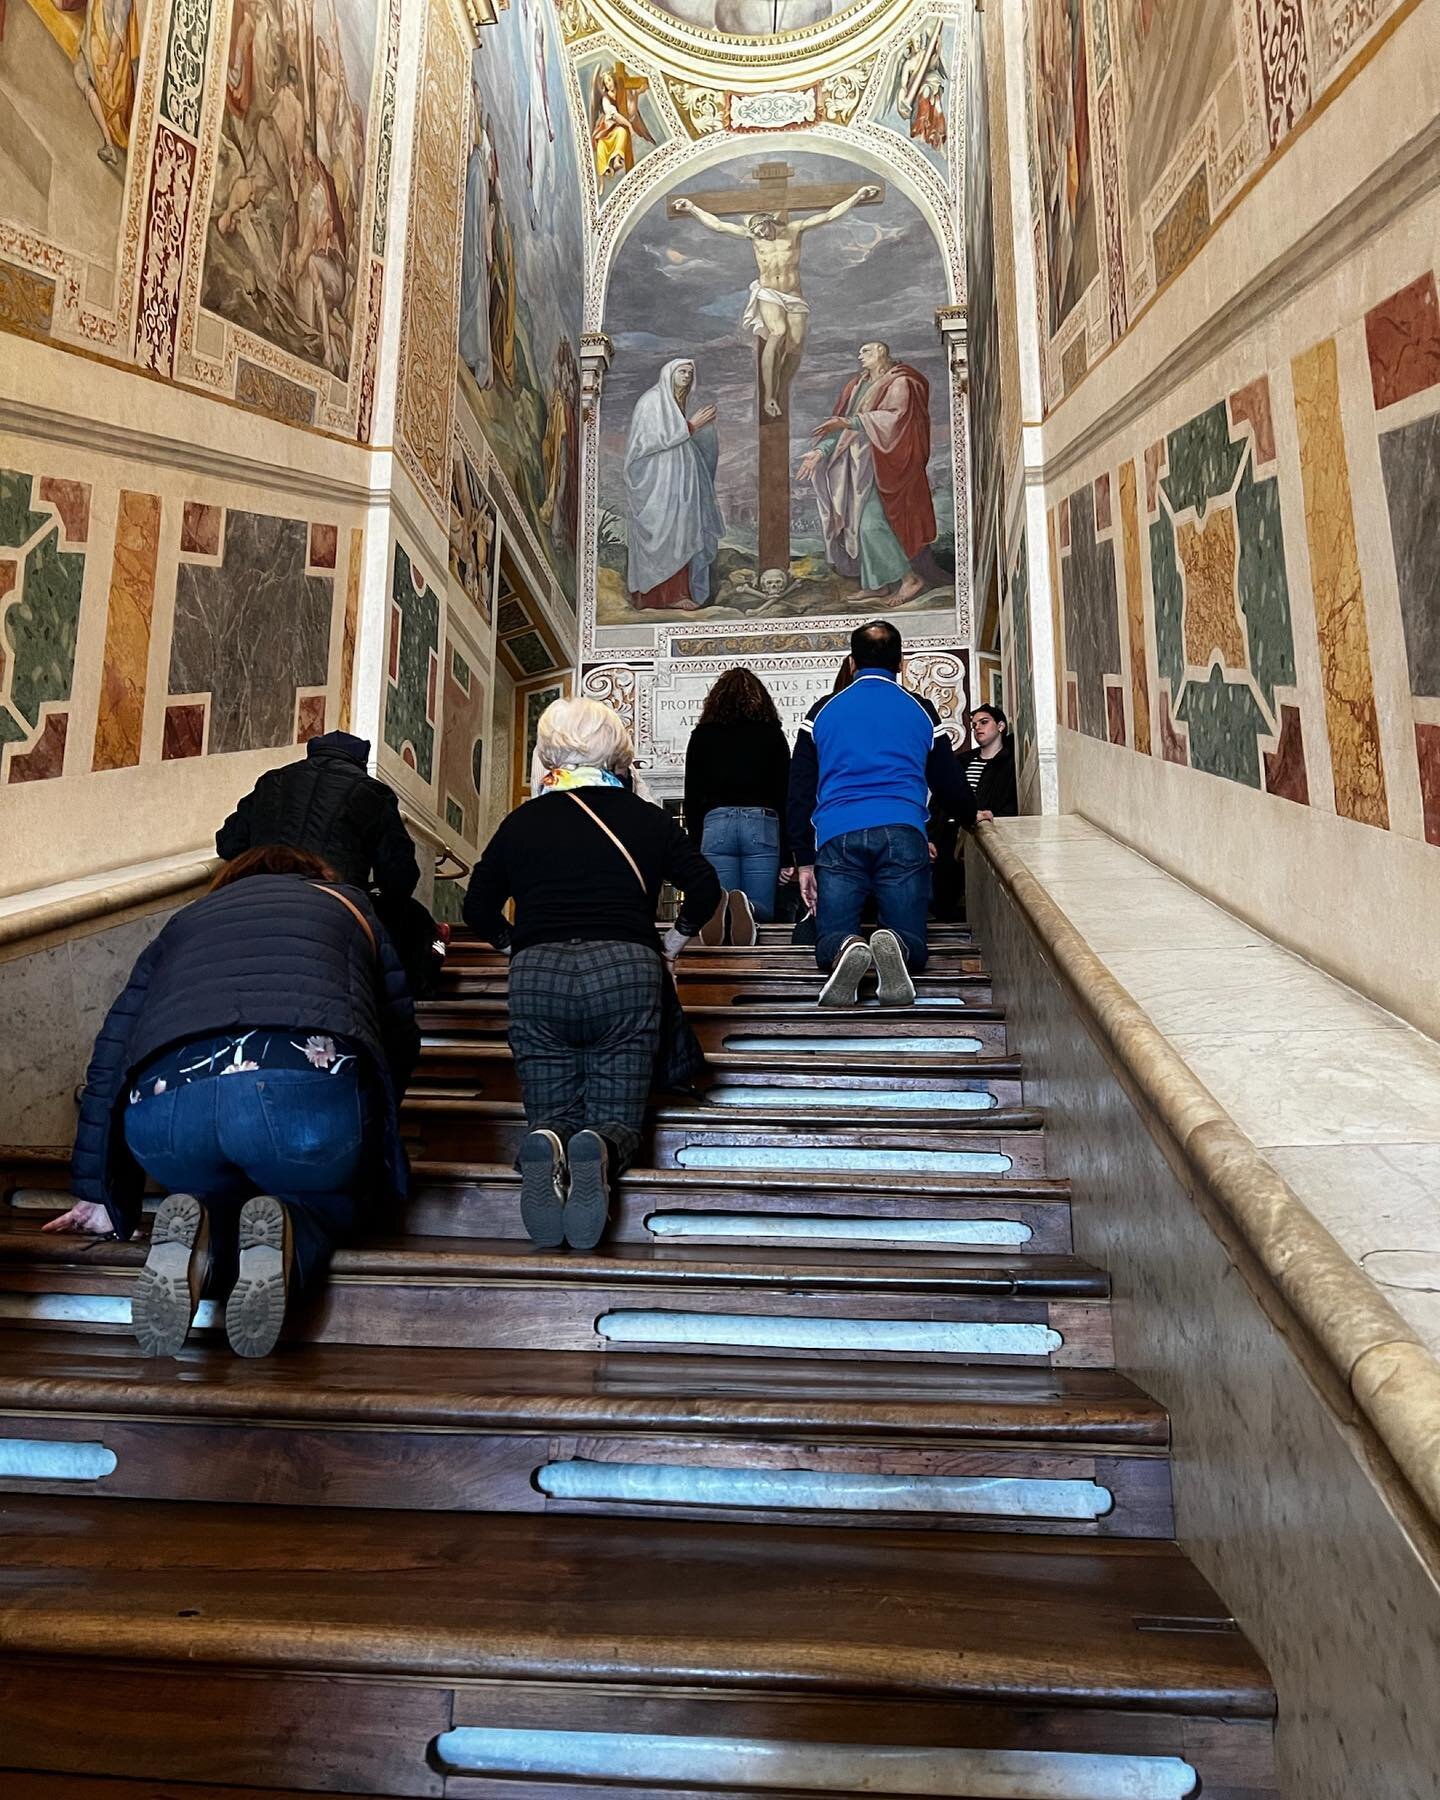 The Scala Sancta:
.
According to Roman Catholic tradition, the Holy Stairs were the steps leading up to the praetorium of Pontius Pilate in Jerusalem on which Jesus Christ stepped on his way to trial during his Passion. The Stairs were brought to Rom